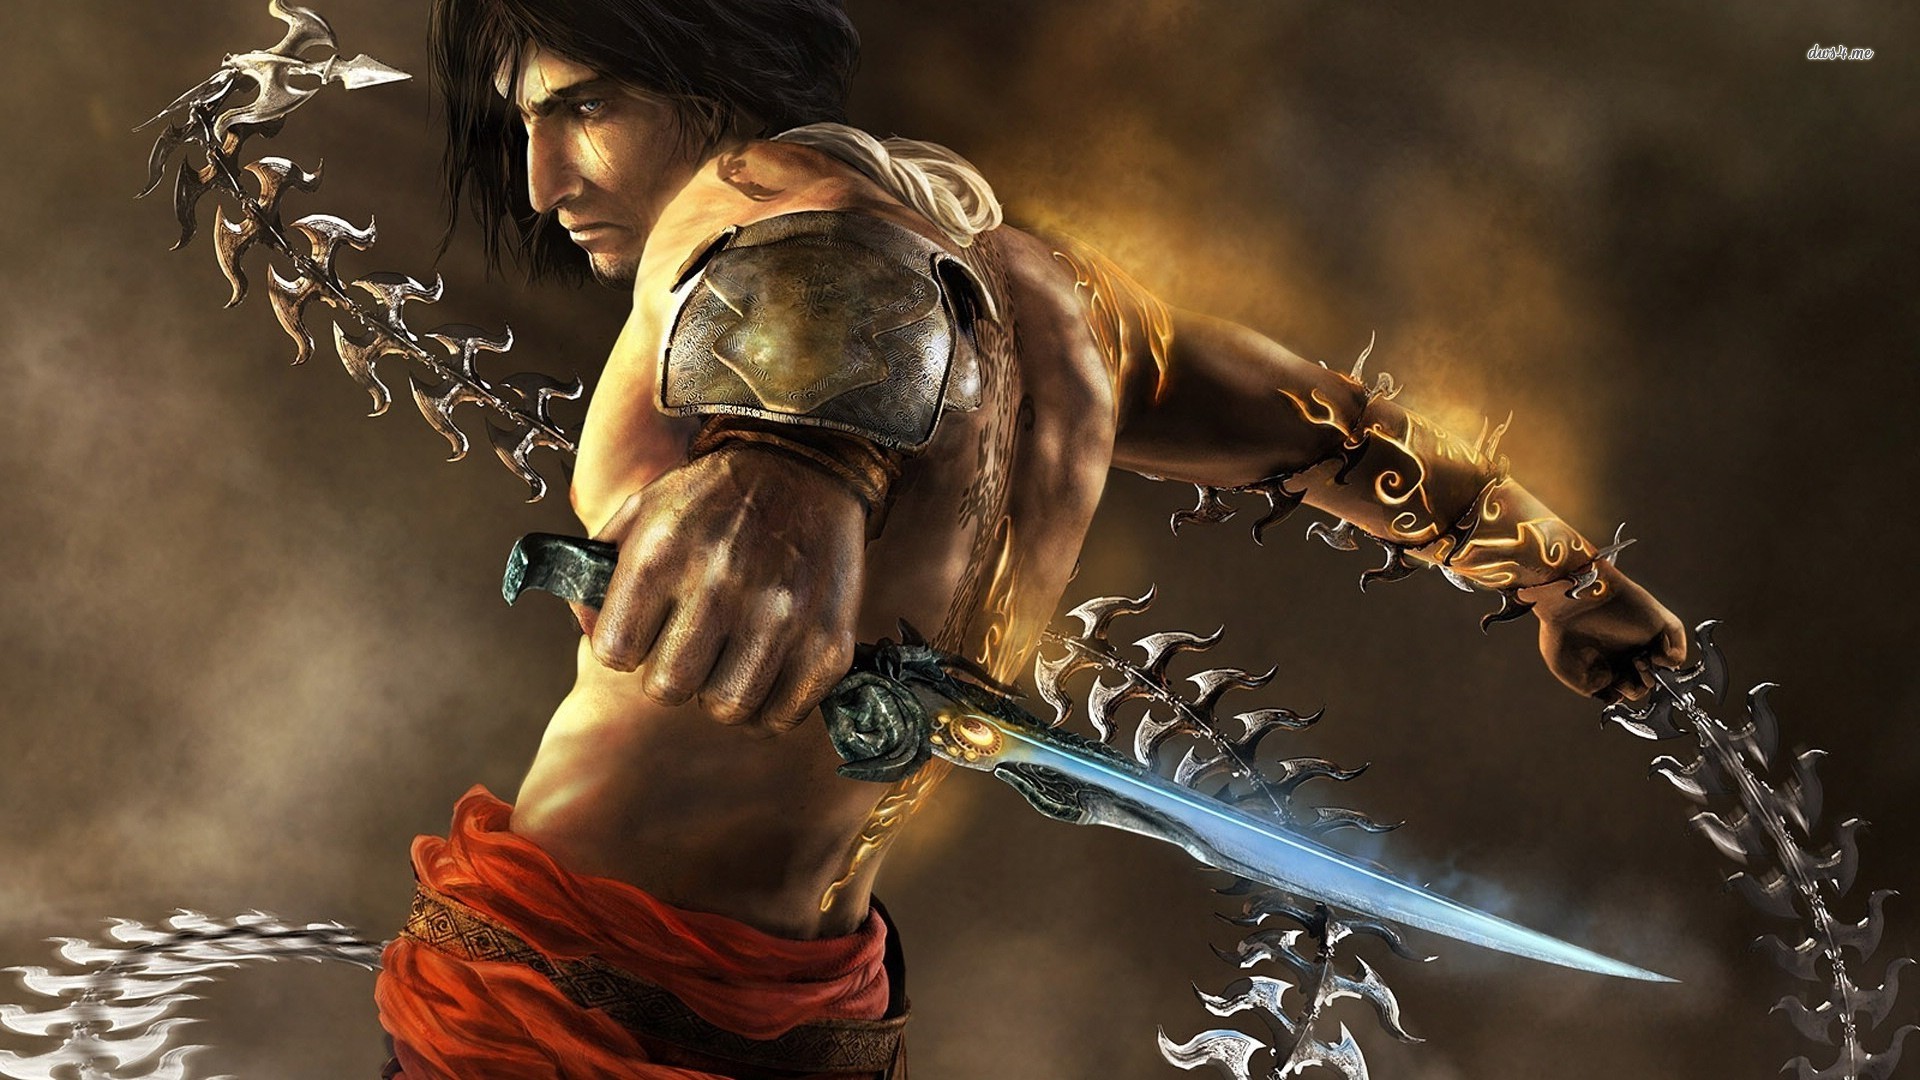 Prince Of Persia Wallpaper Hd - Prince Of Persia Game Hd , HD Wallpaper & Backgrounds